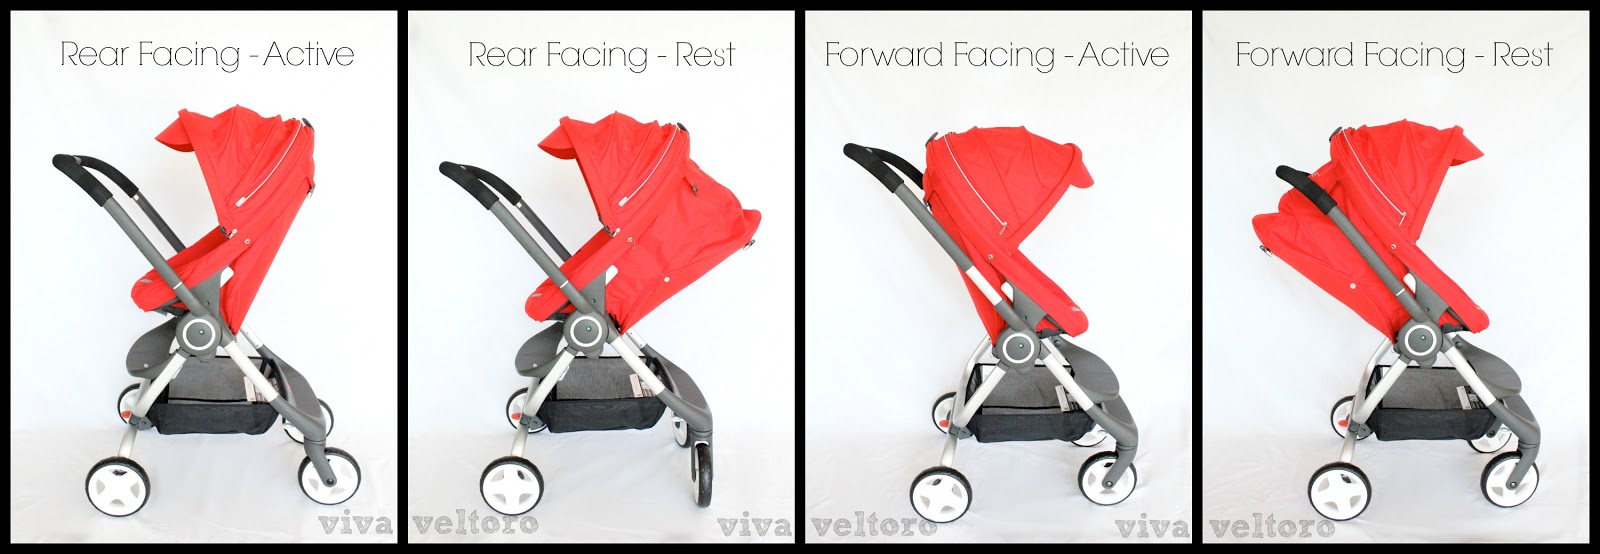 Stokke Scoot Review! Stroll in style with this stroller! - Viva